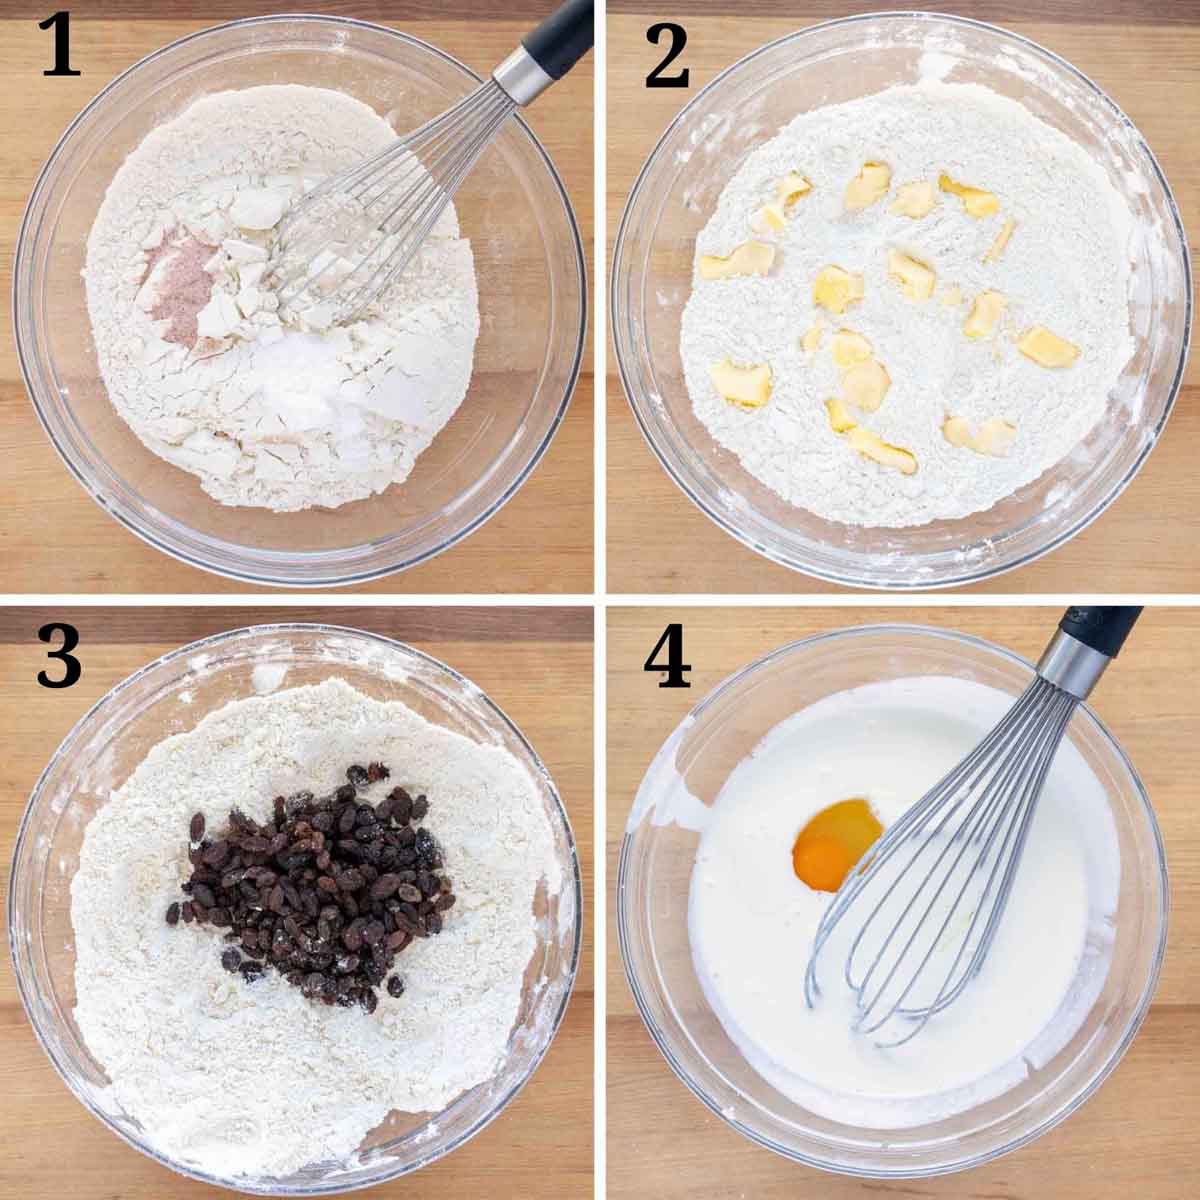 images showing how to make irish soda bread